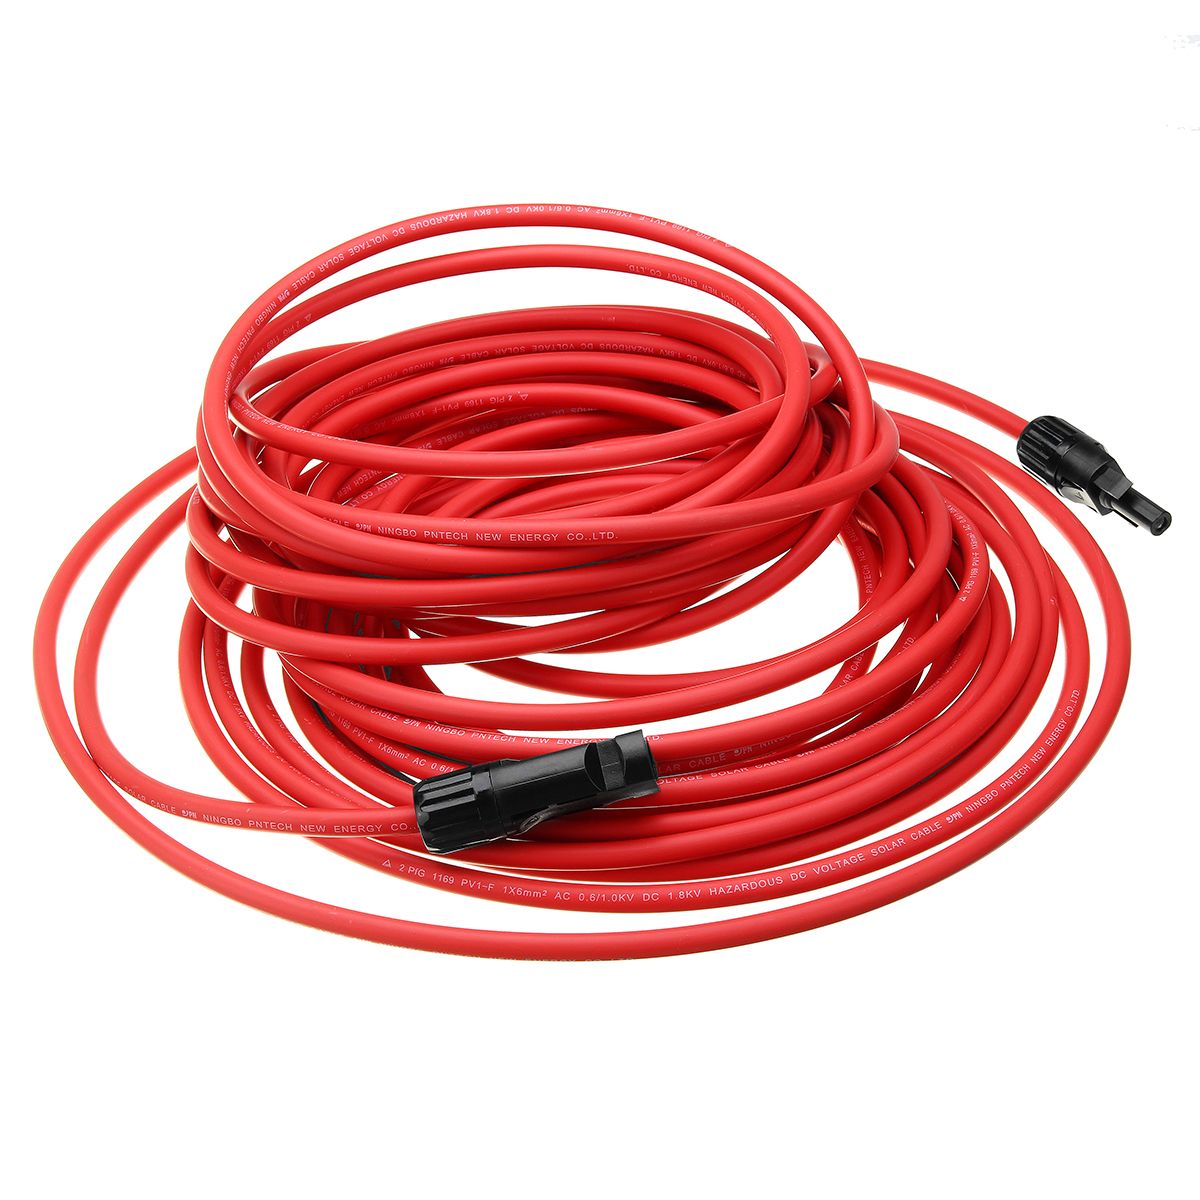 10-AWG-15-Meter-Solar-Panel-Extension-Cable-Wire-BlackRed-with-MC4-Connectors-1338753